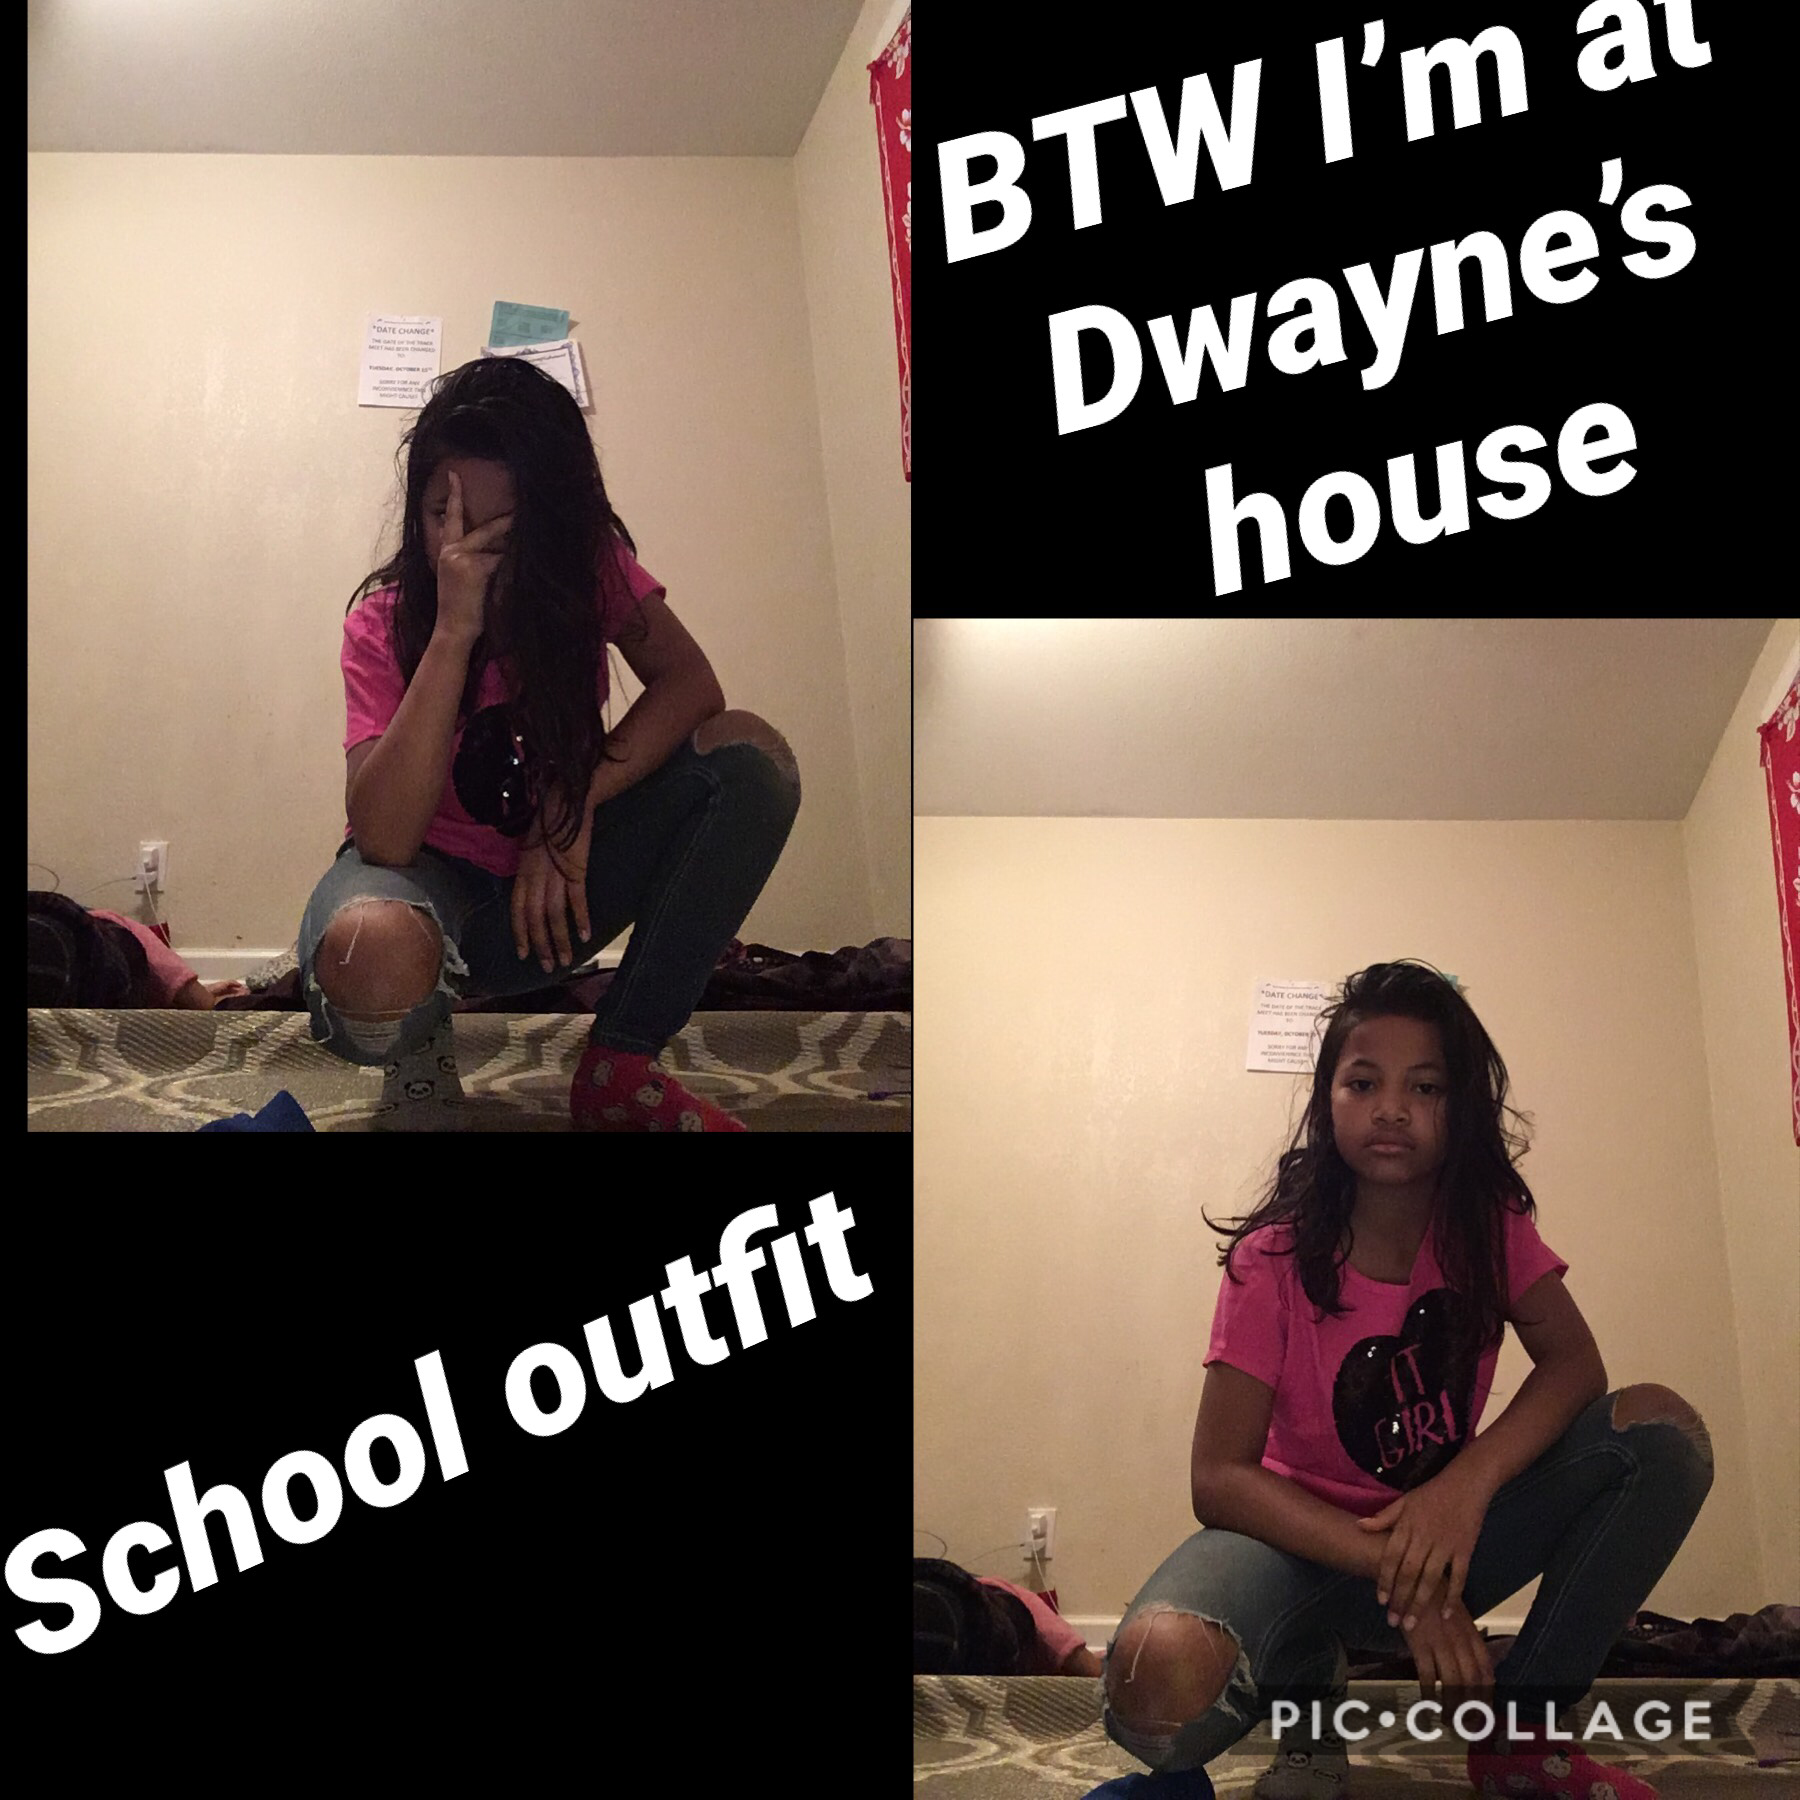 School outfit 